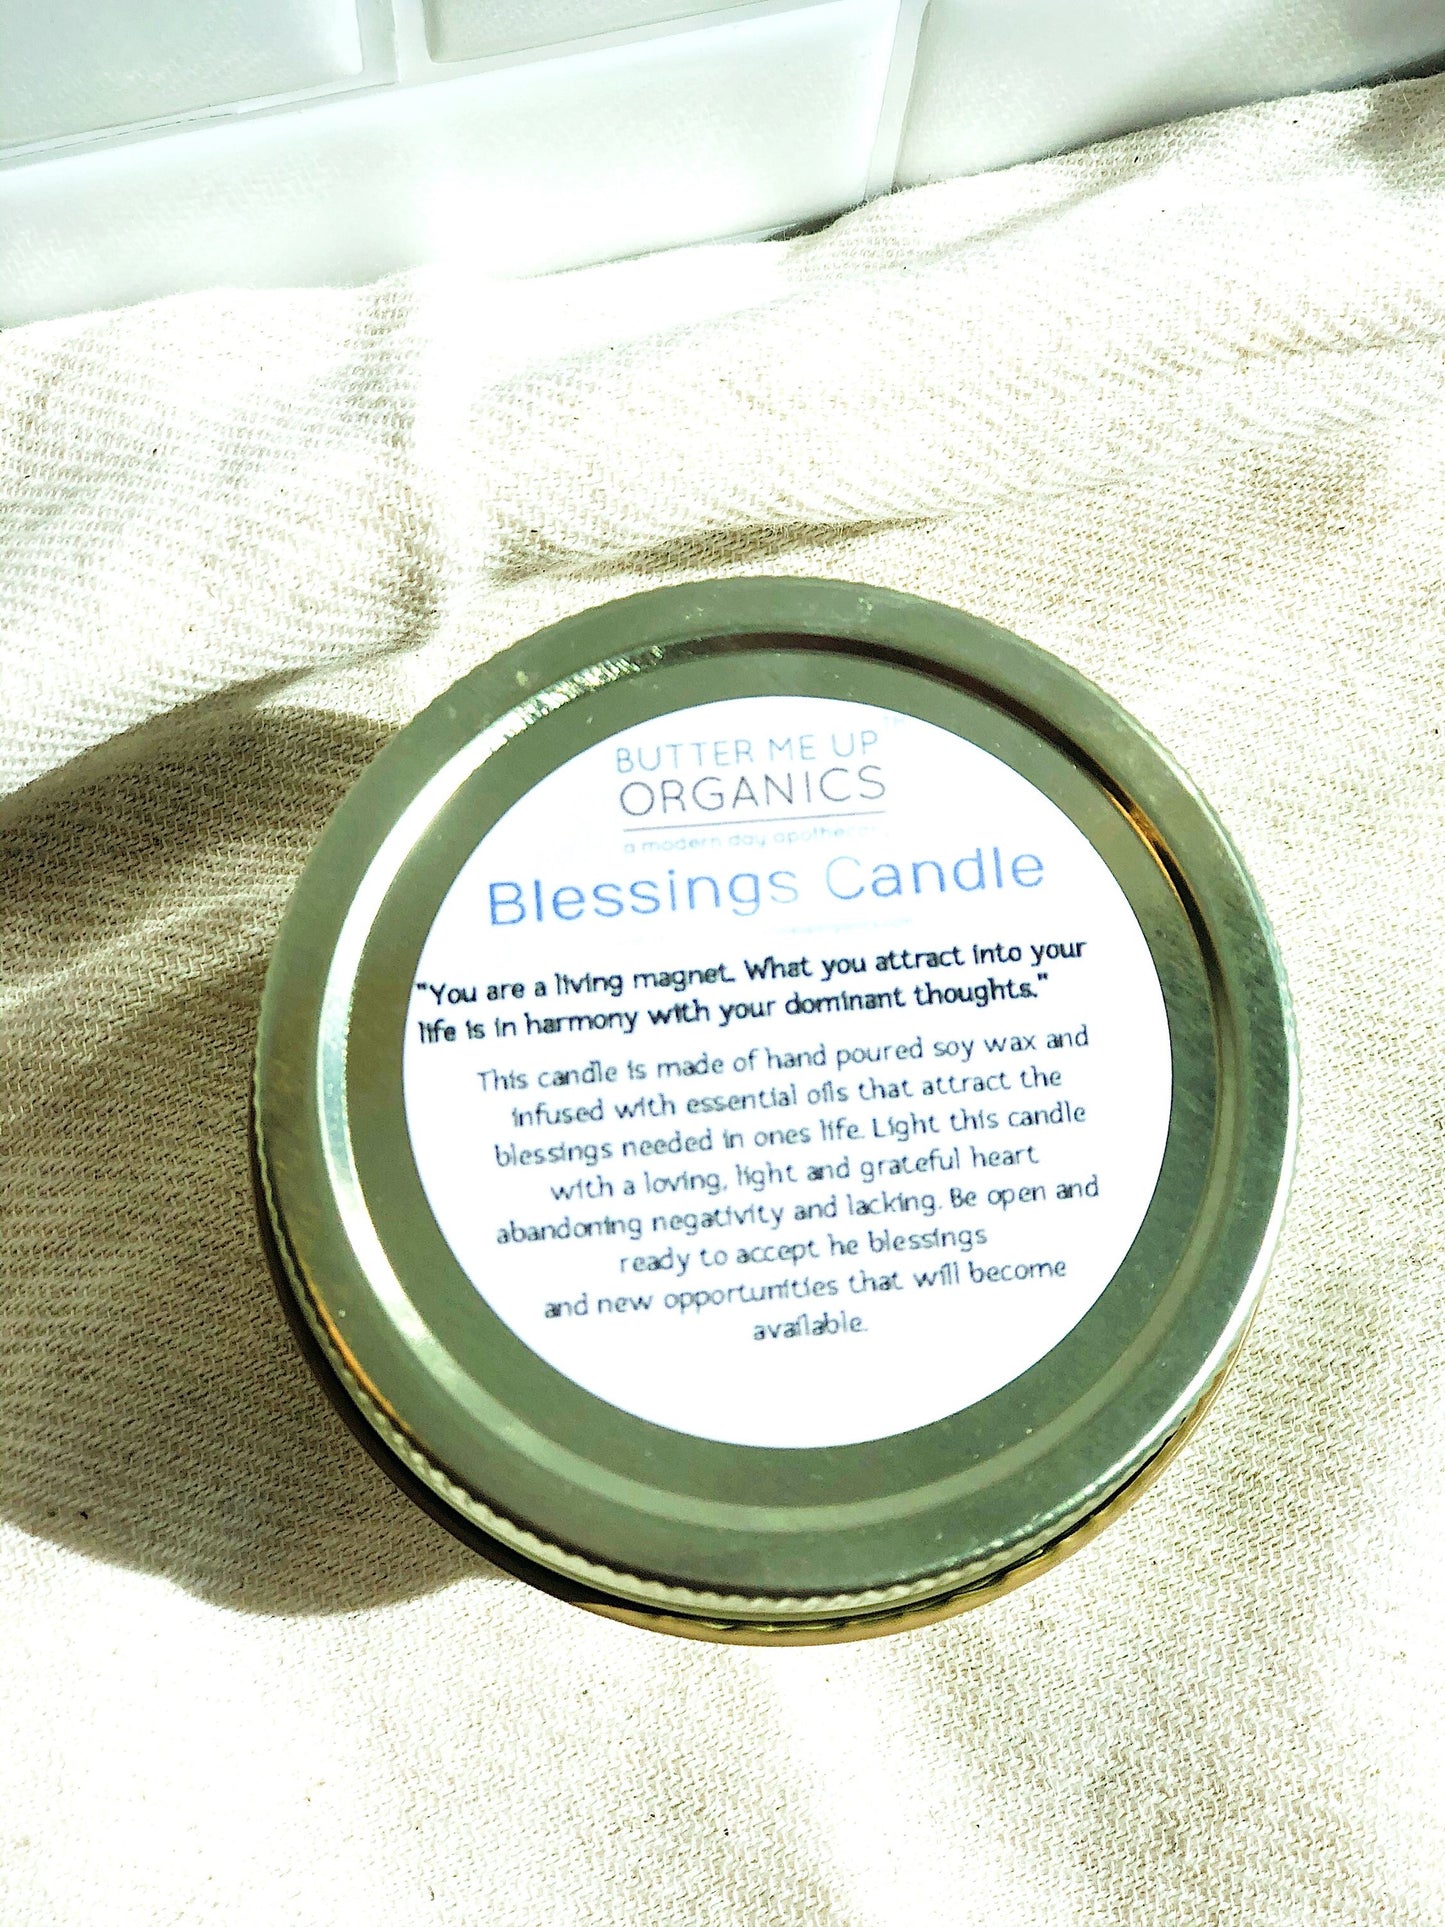 Blessings Candle / Intention Candle / Good Luck / Soy Handpoured